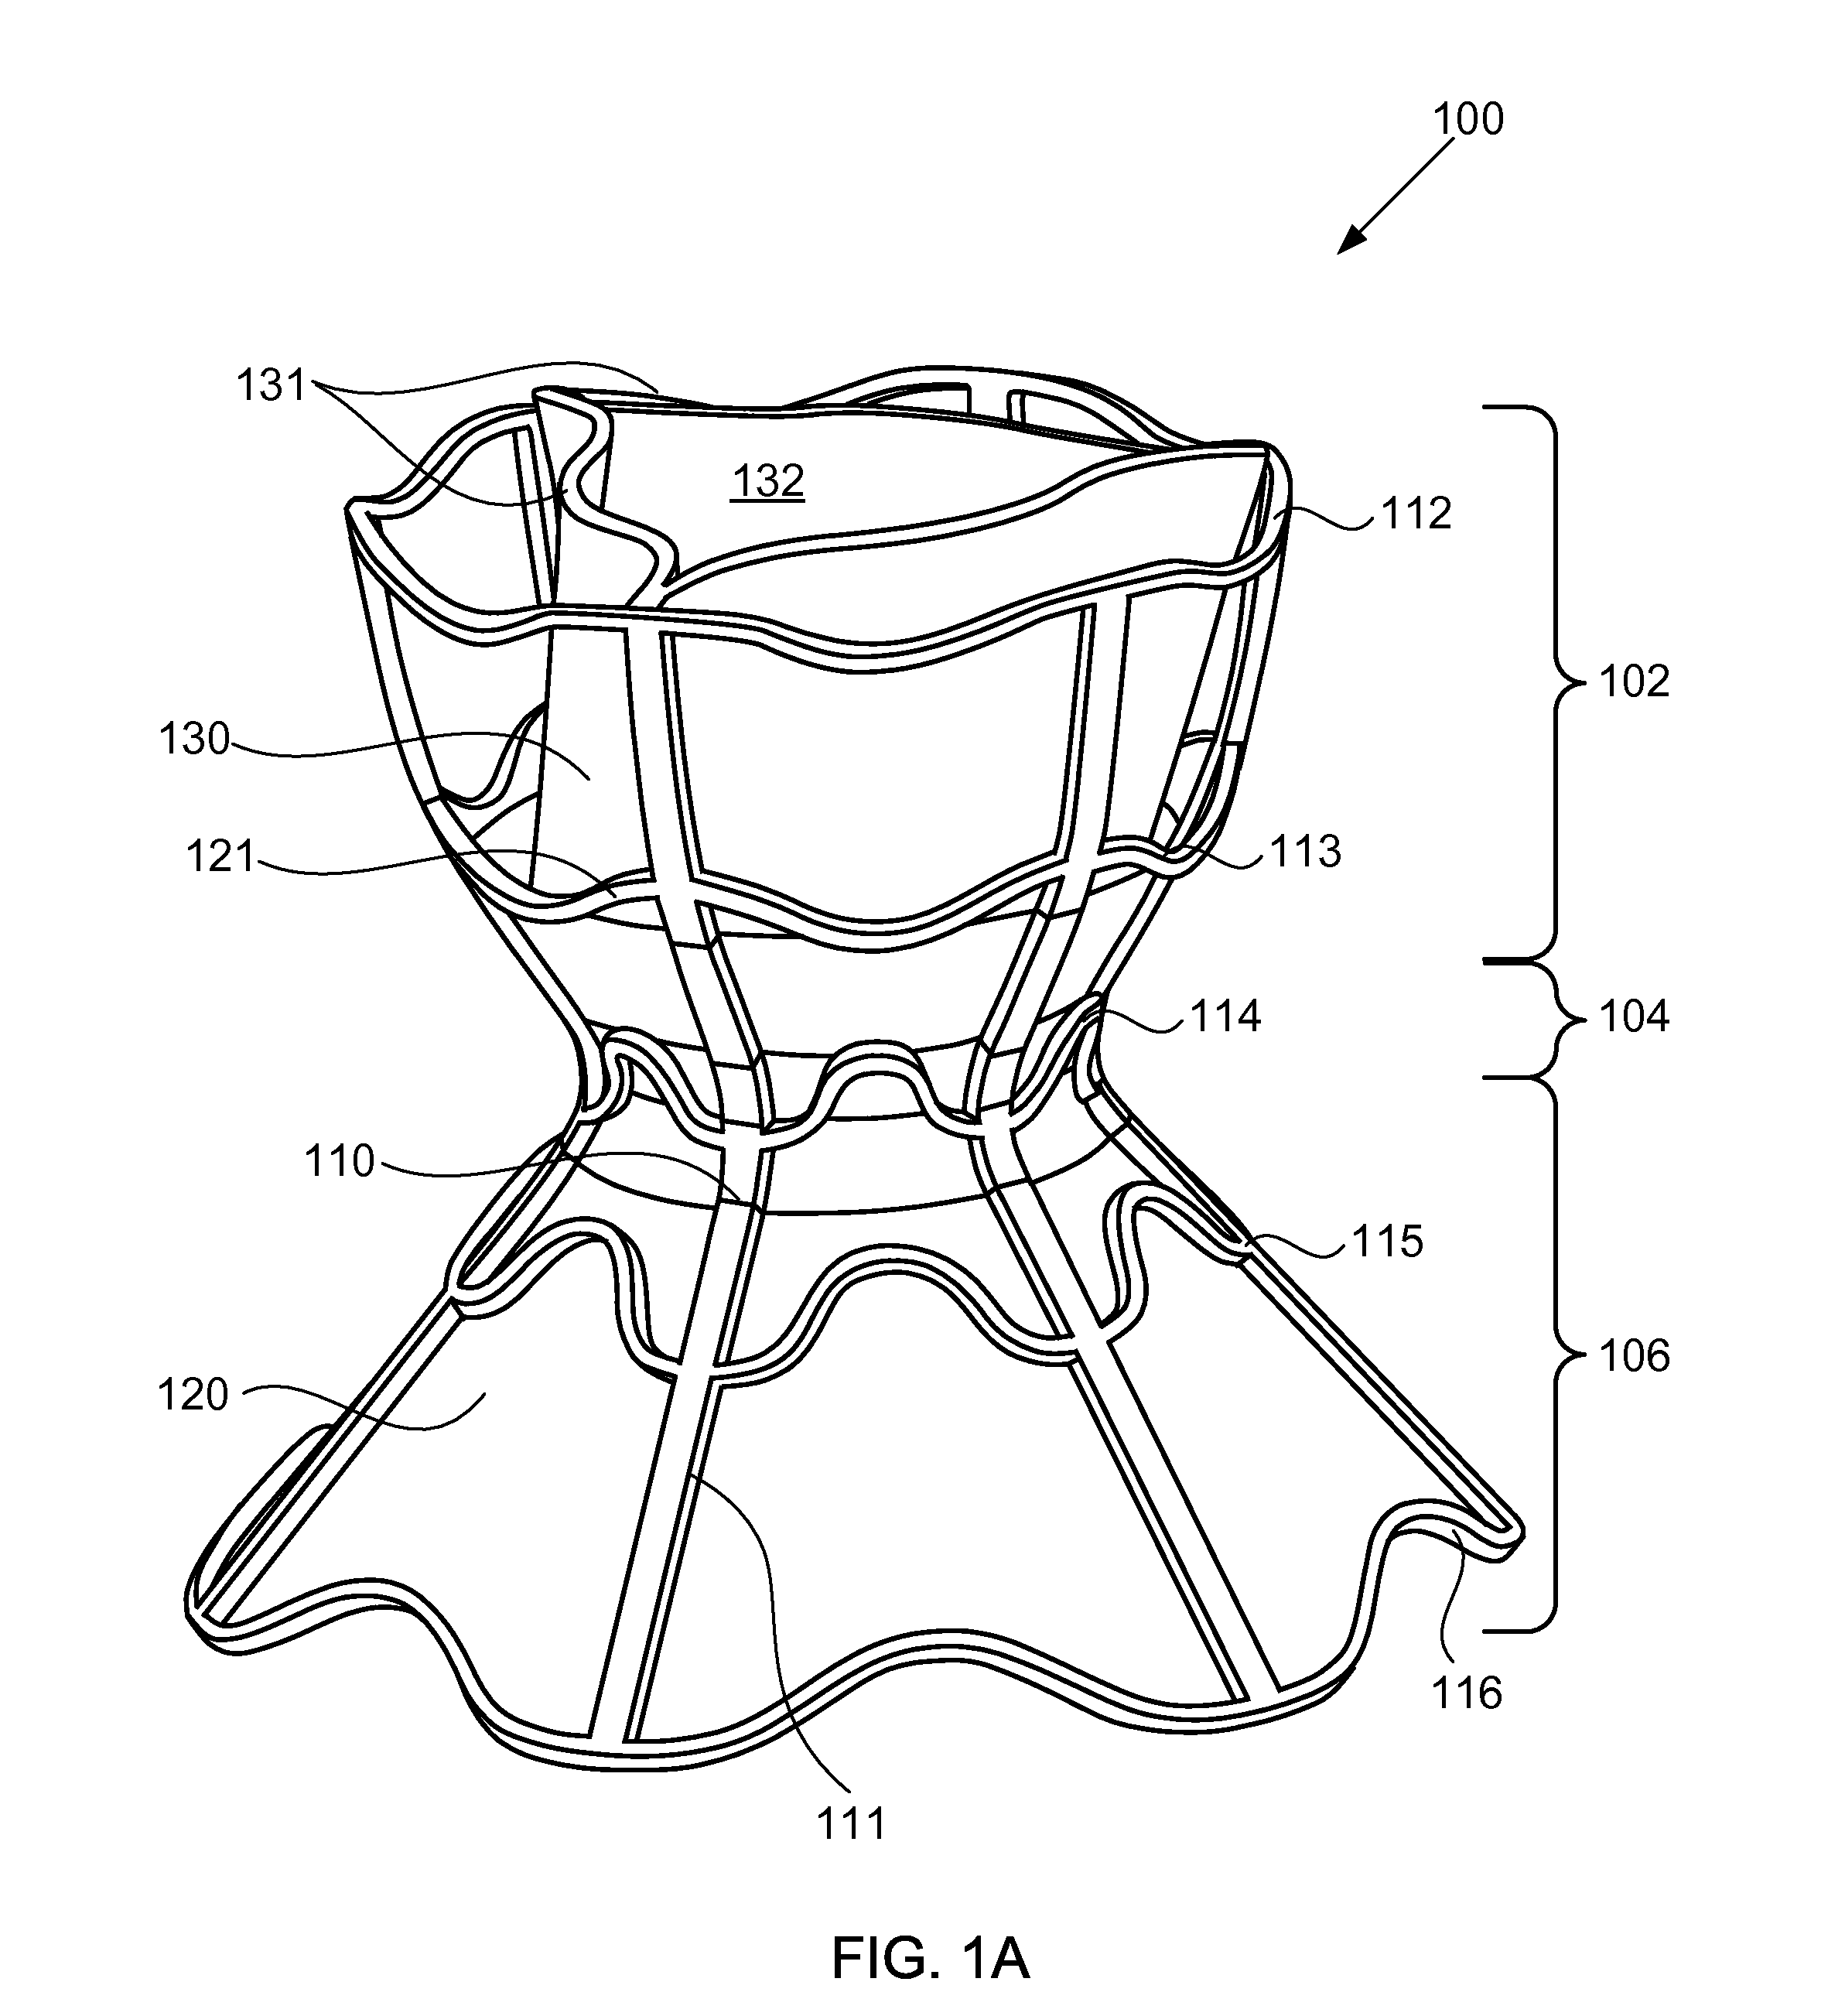 Apparatus and methods for delivering devices for reducing left atrial pressure